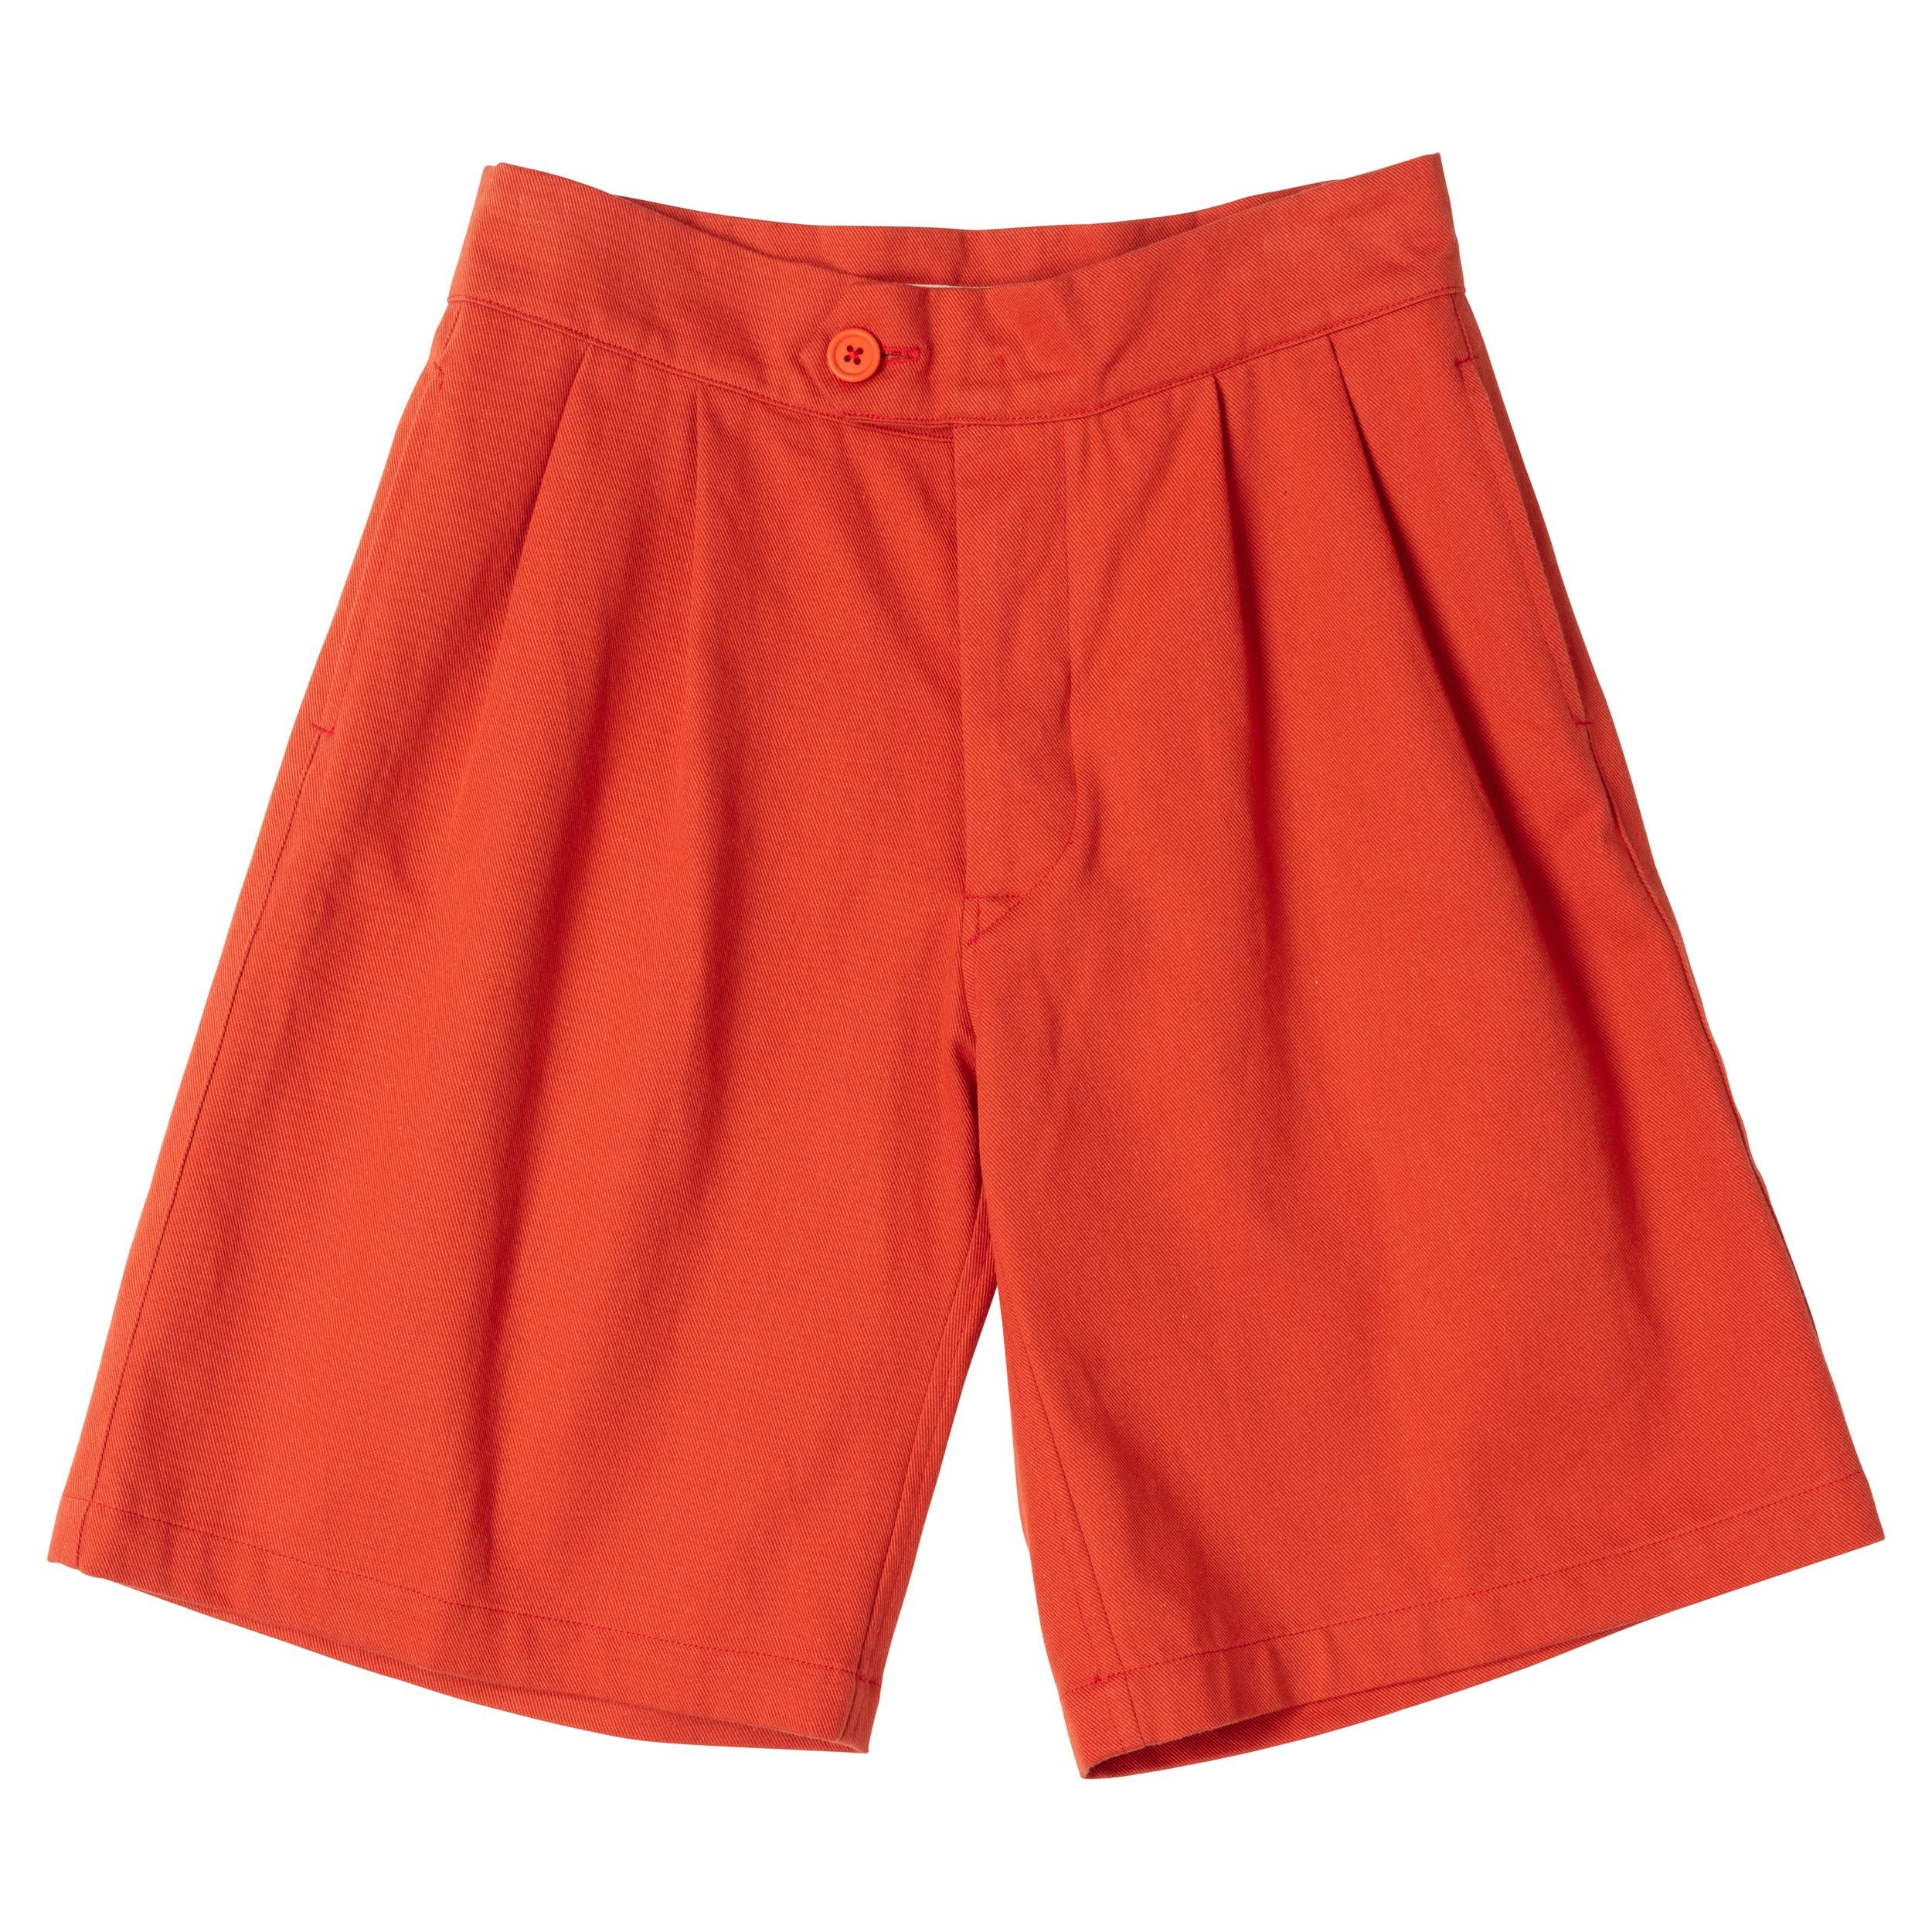 Carrier Company Ladies Shorts in Orange